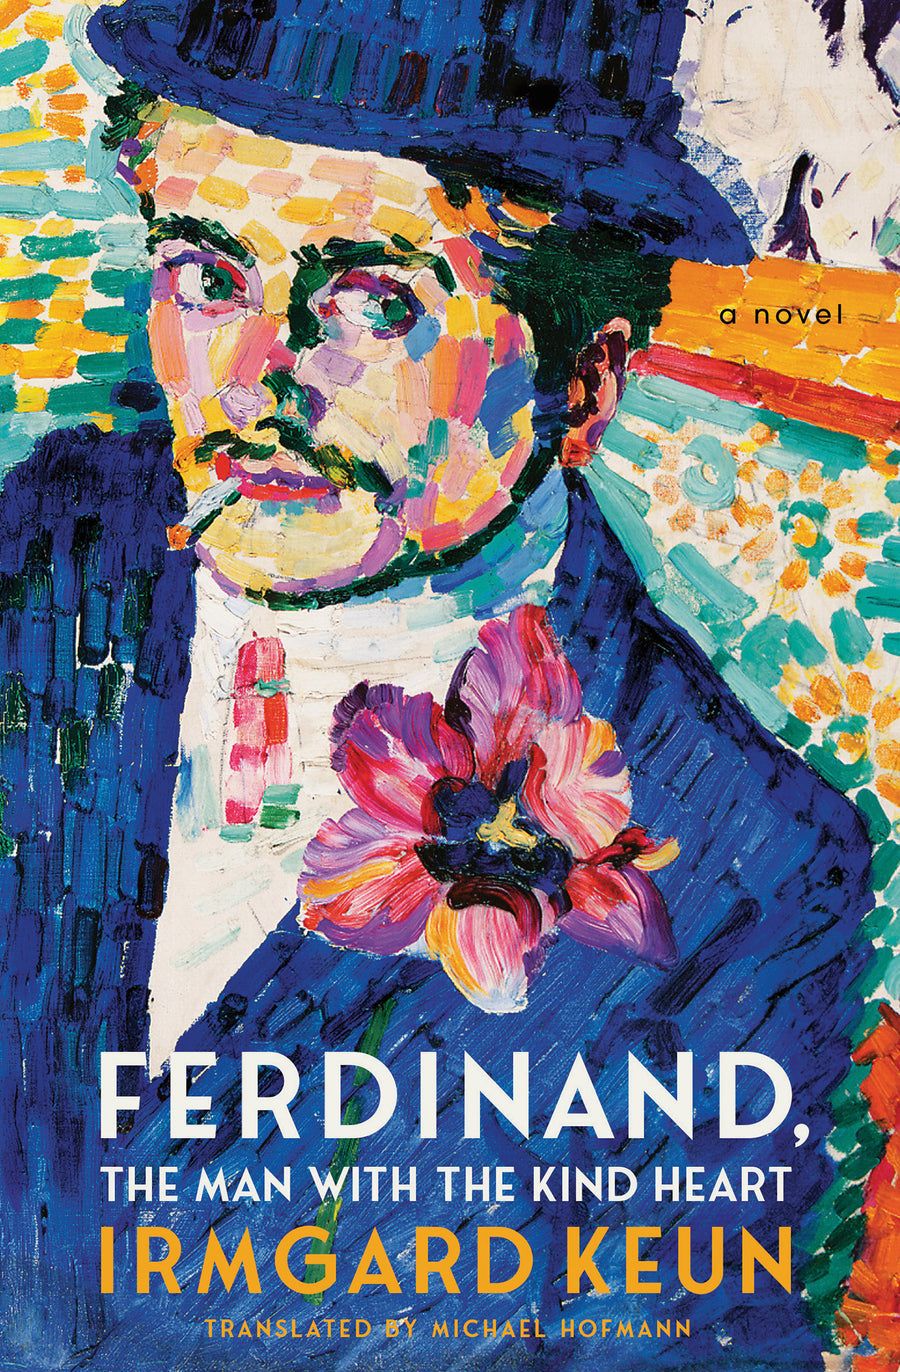 Ferdinand, The Man with the Kind Heart